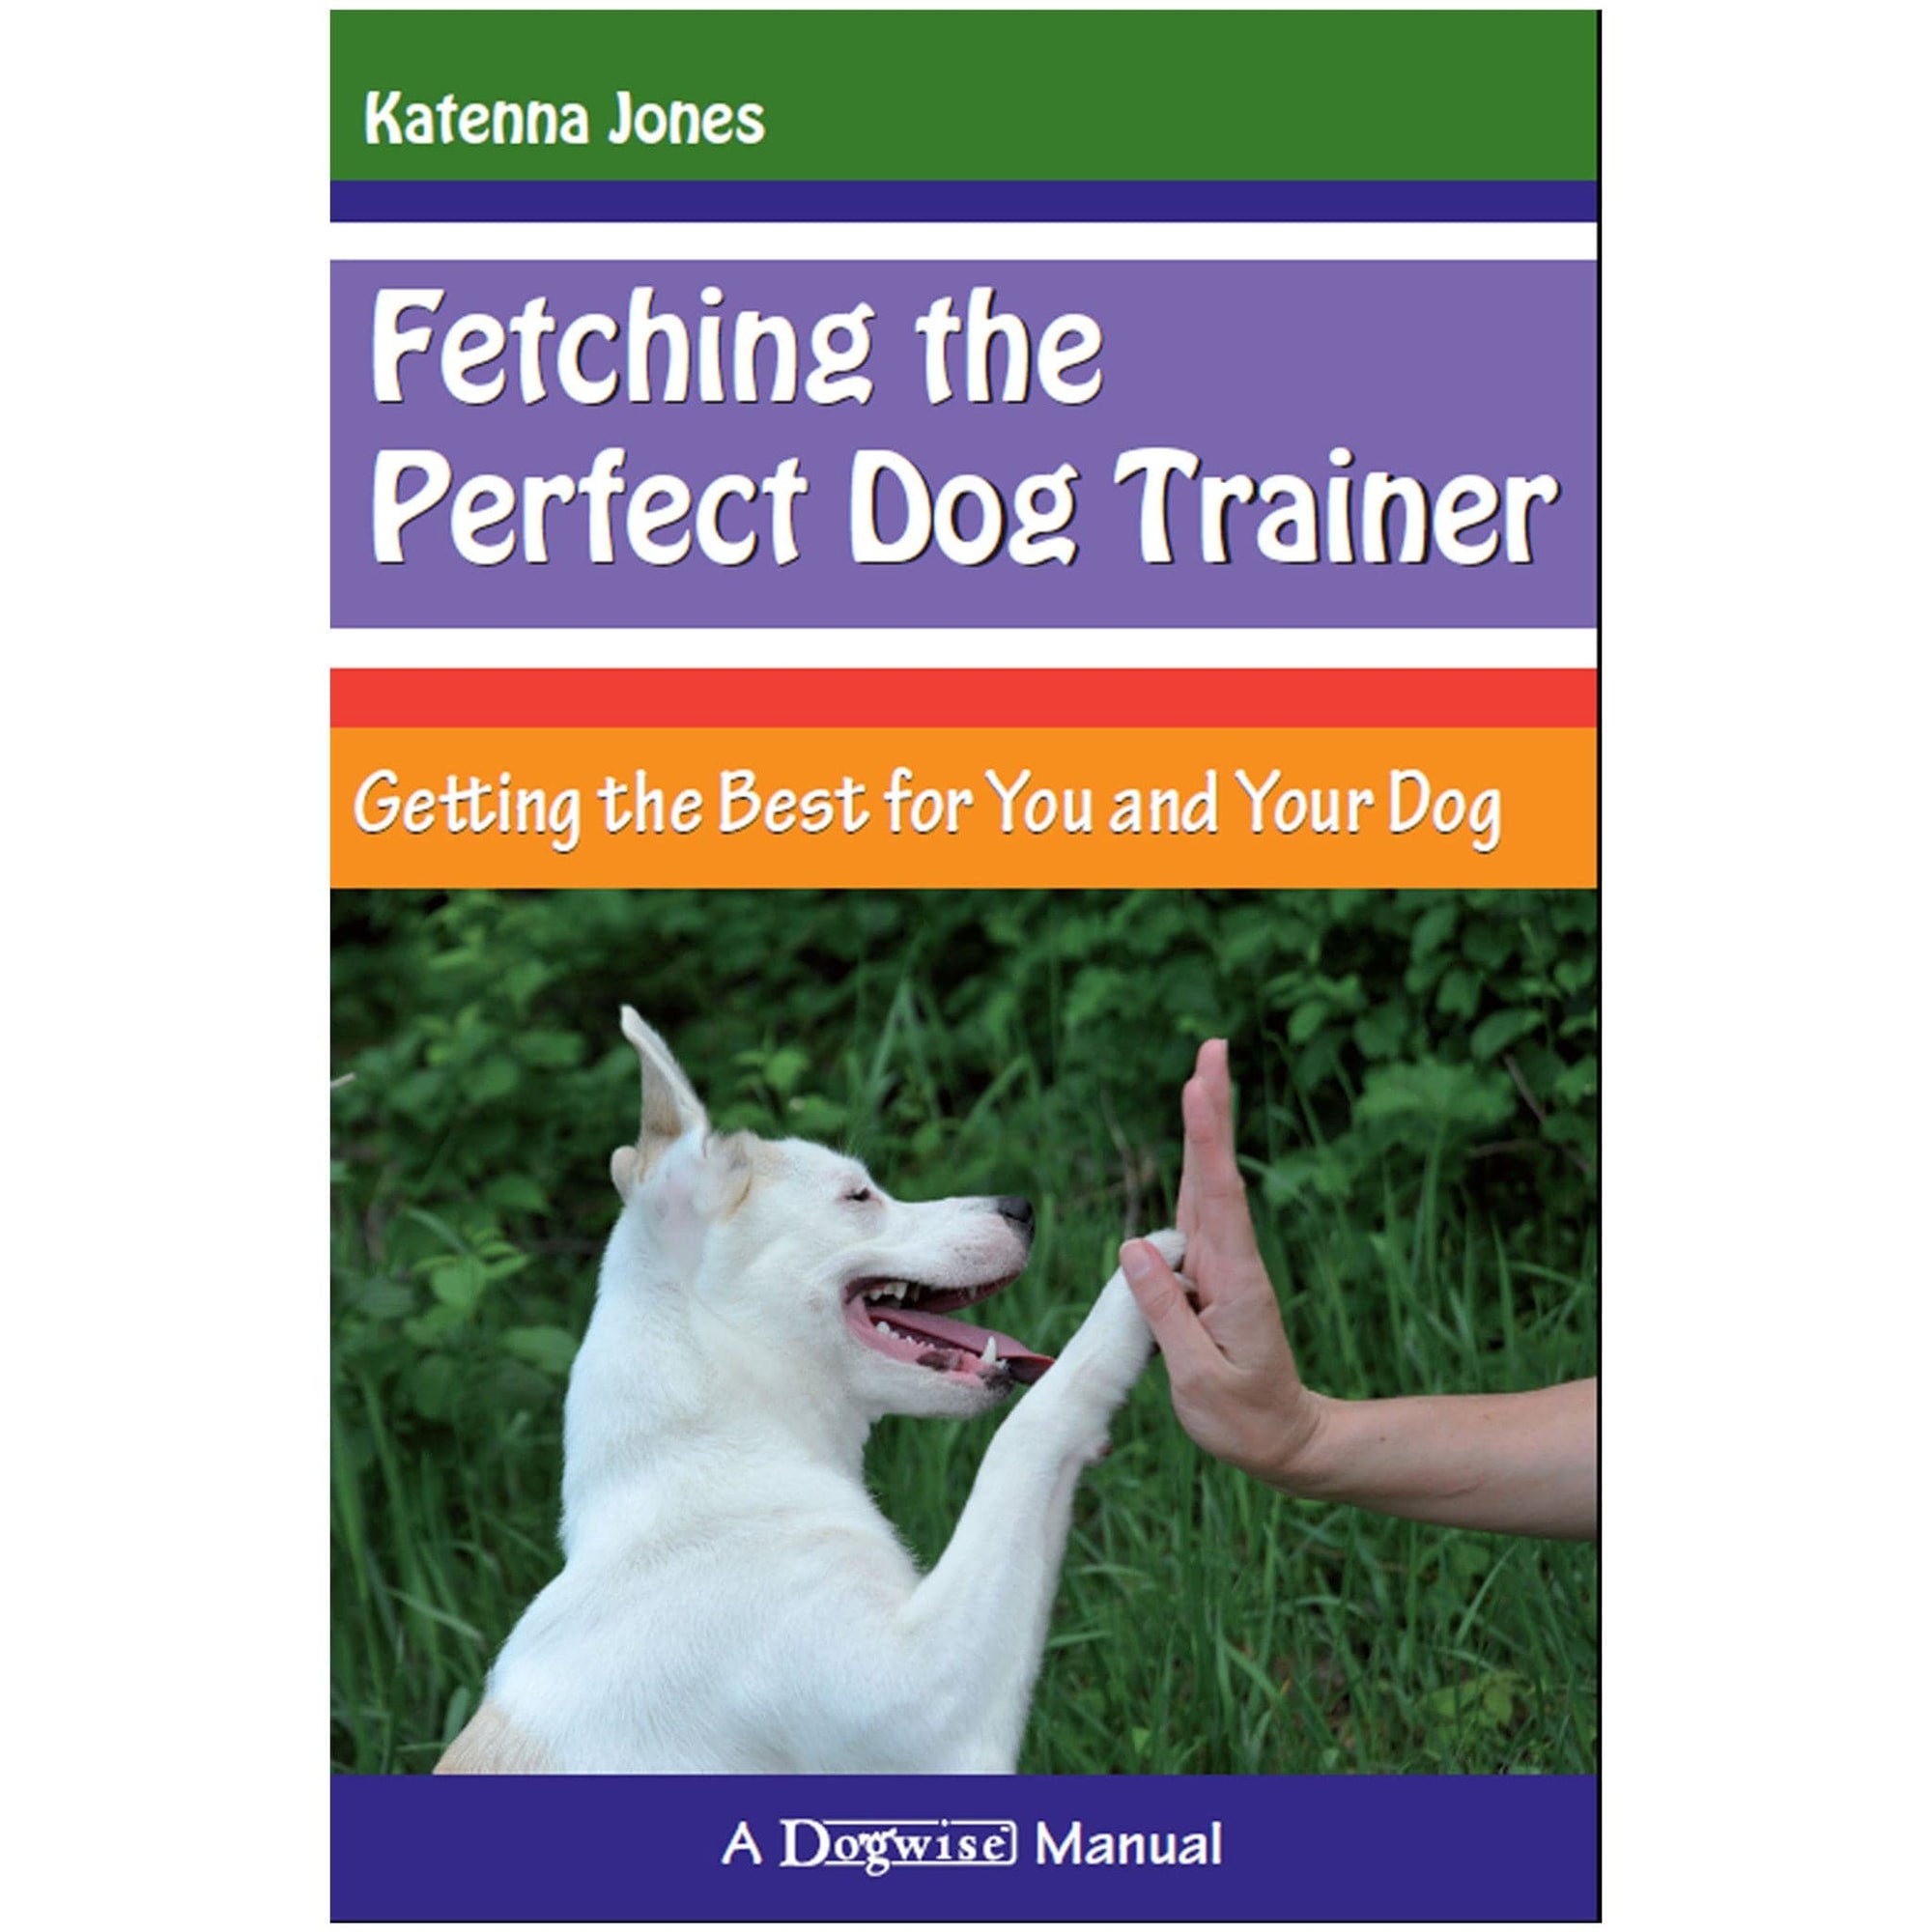 E-BOOK Fetching the Perfect Dog Trainer by Katenna Jones